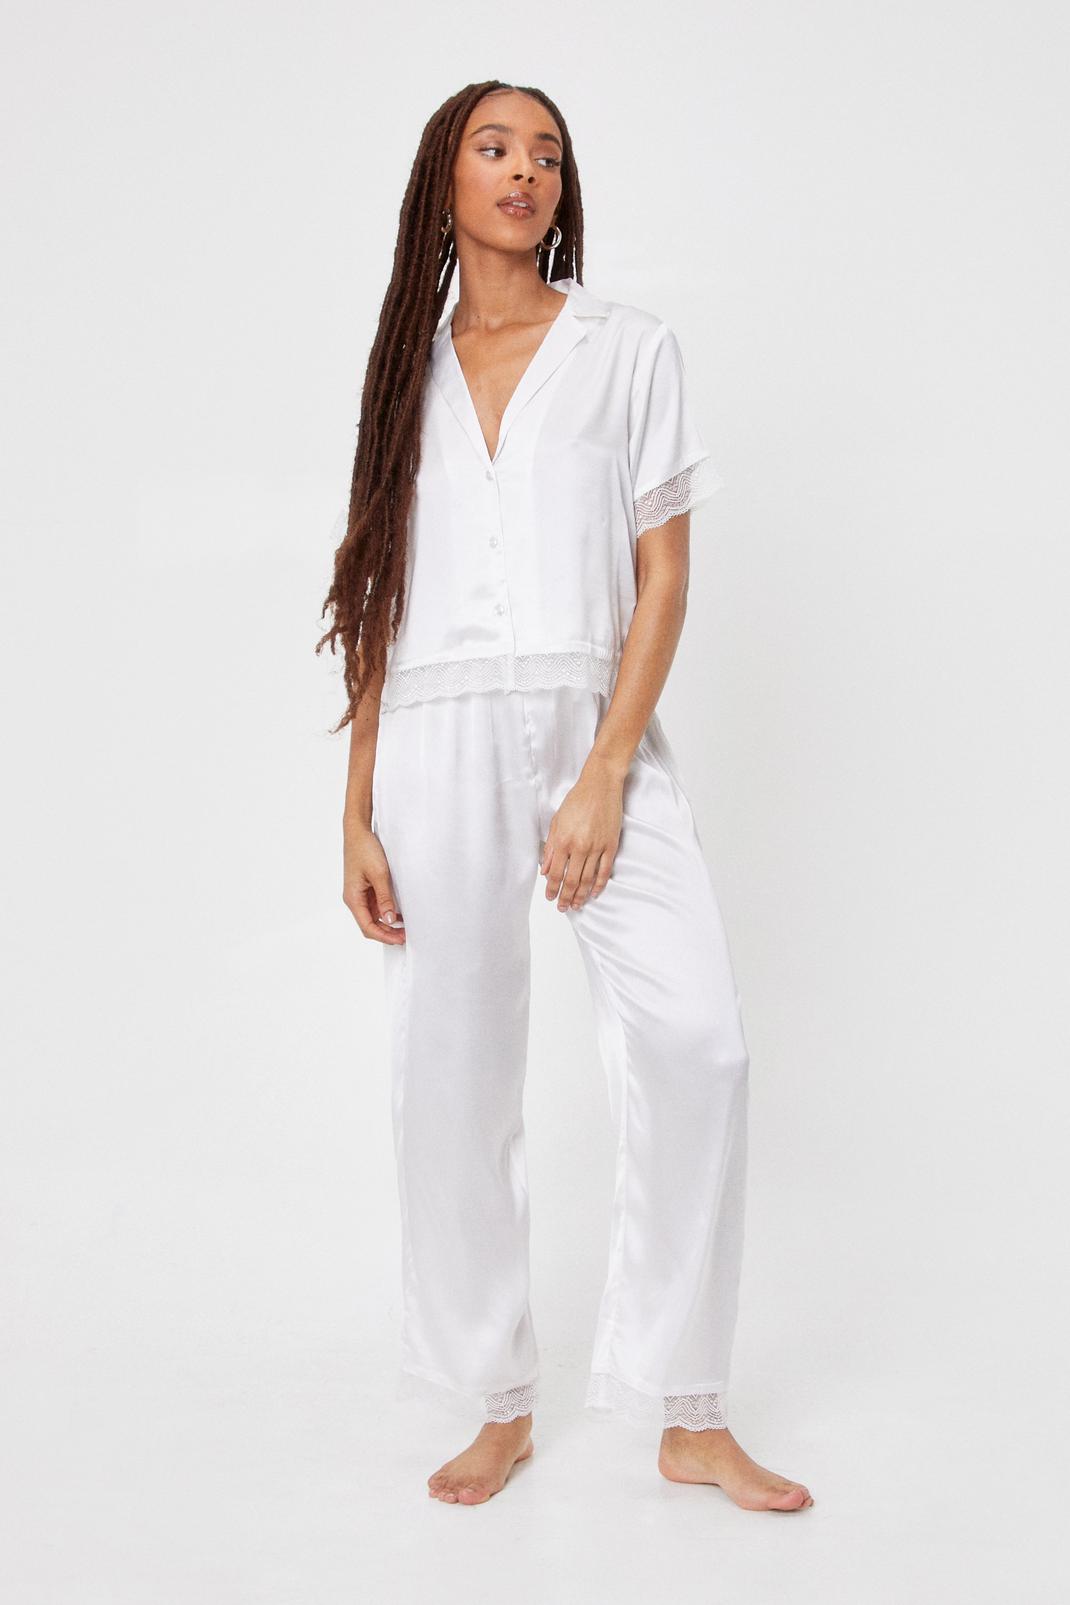 Cream Invest in Rest Satin Lace Pants Pajama Set image number 1